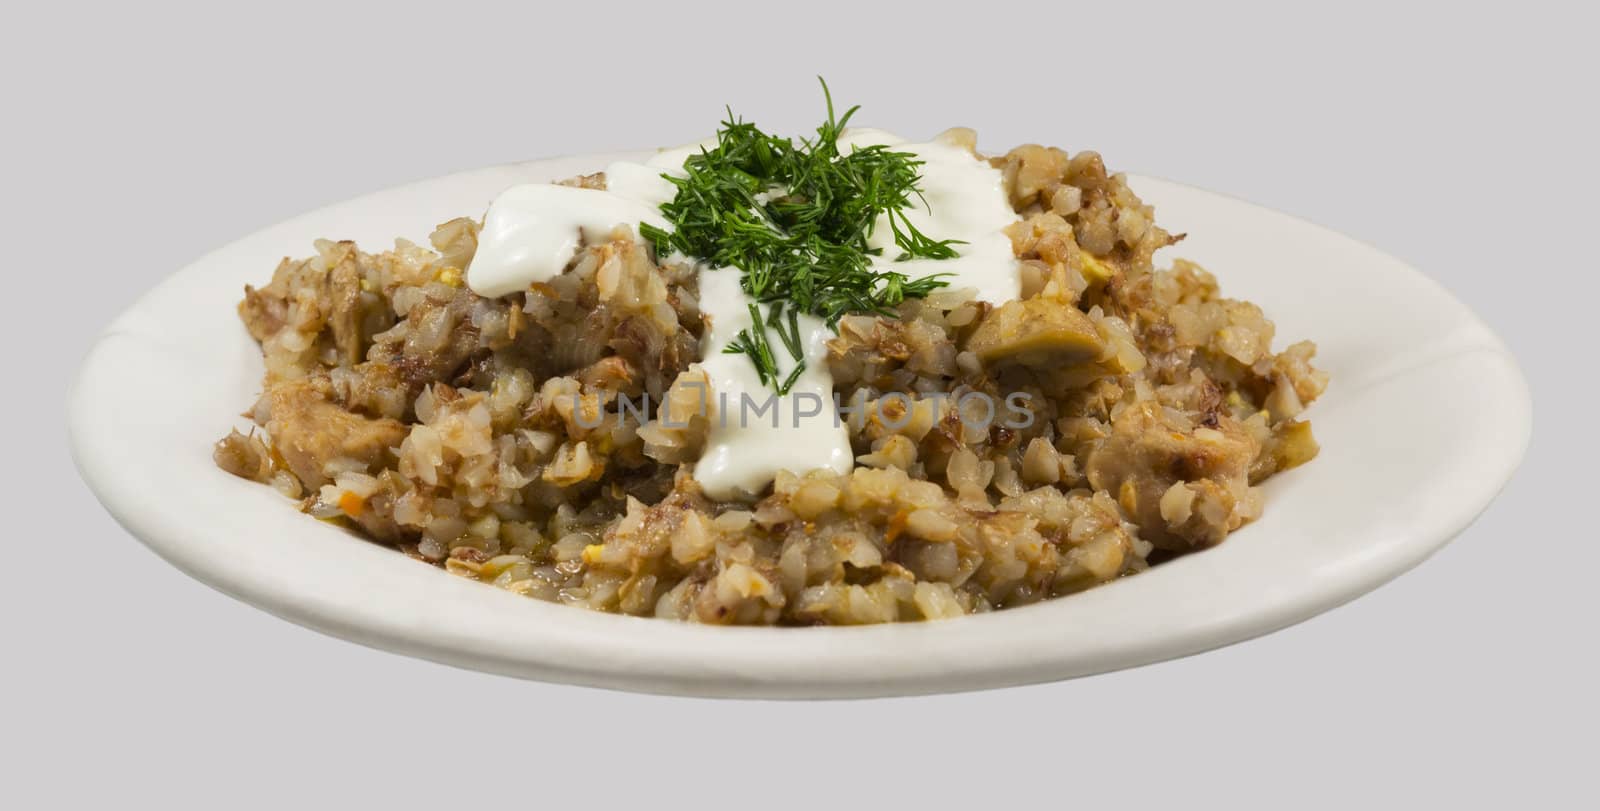 Buckwheat porridge, mixed with grated egg and poured sour cream with dill on white plate. Isolated on a light gray background.